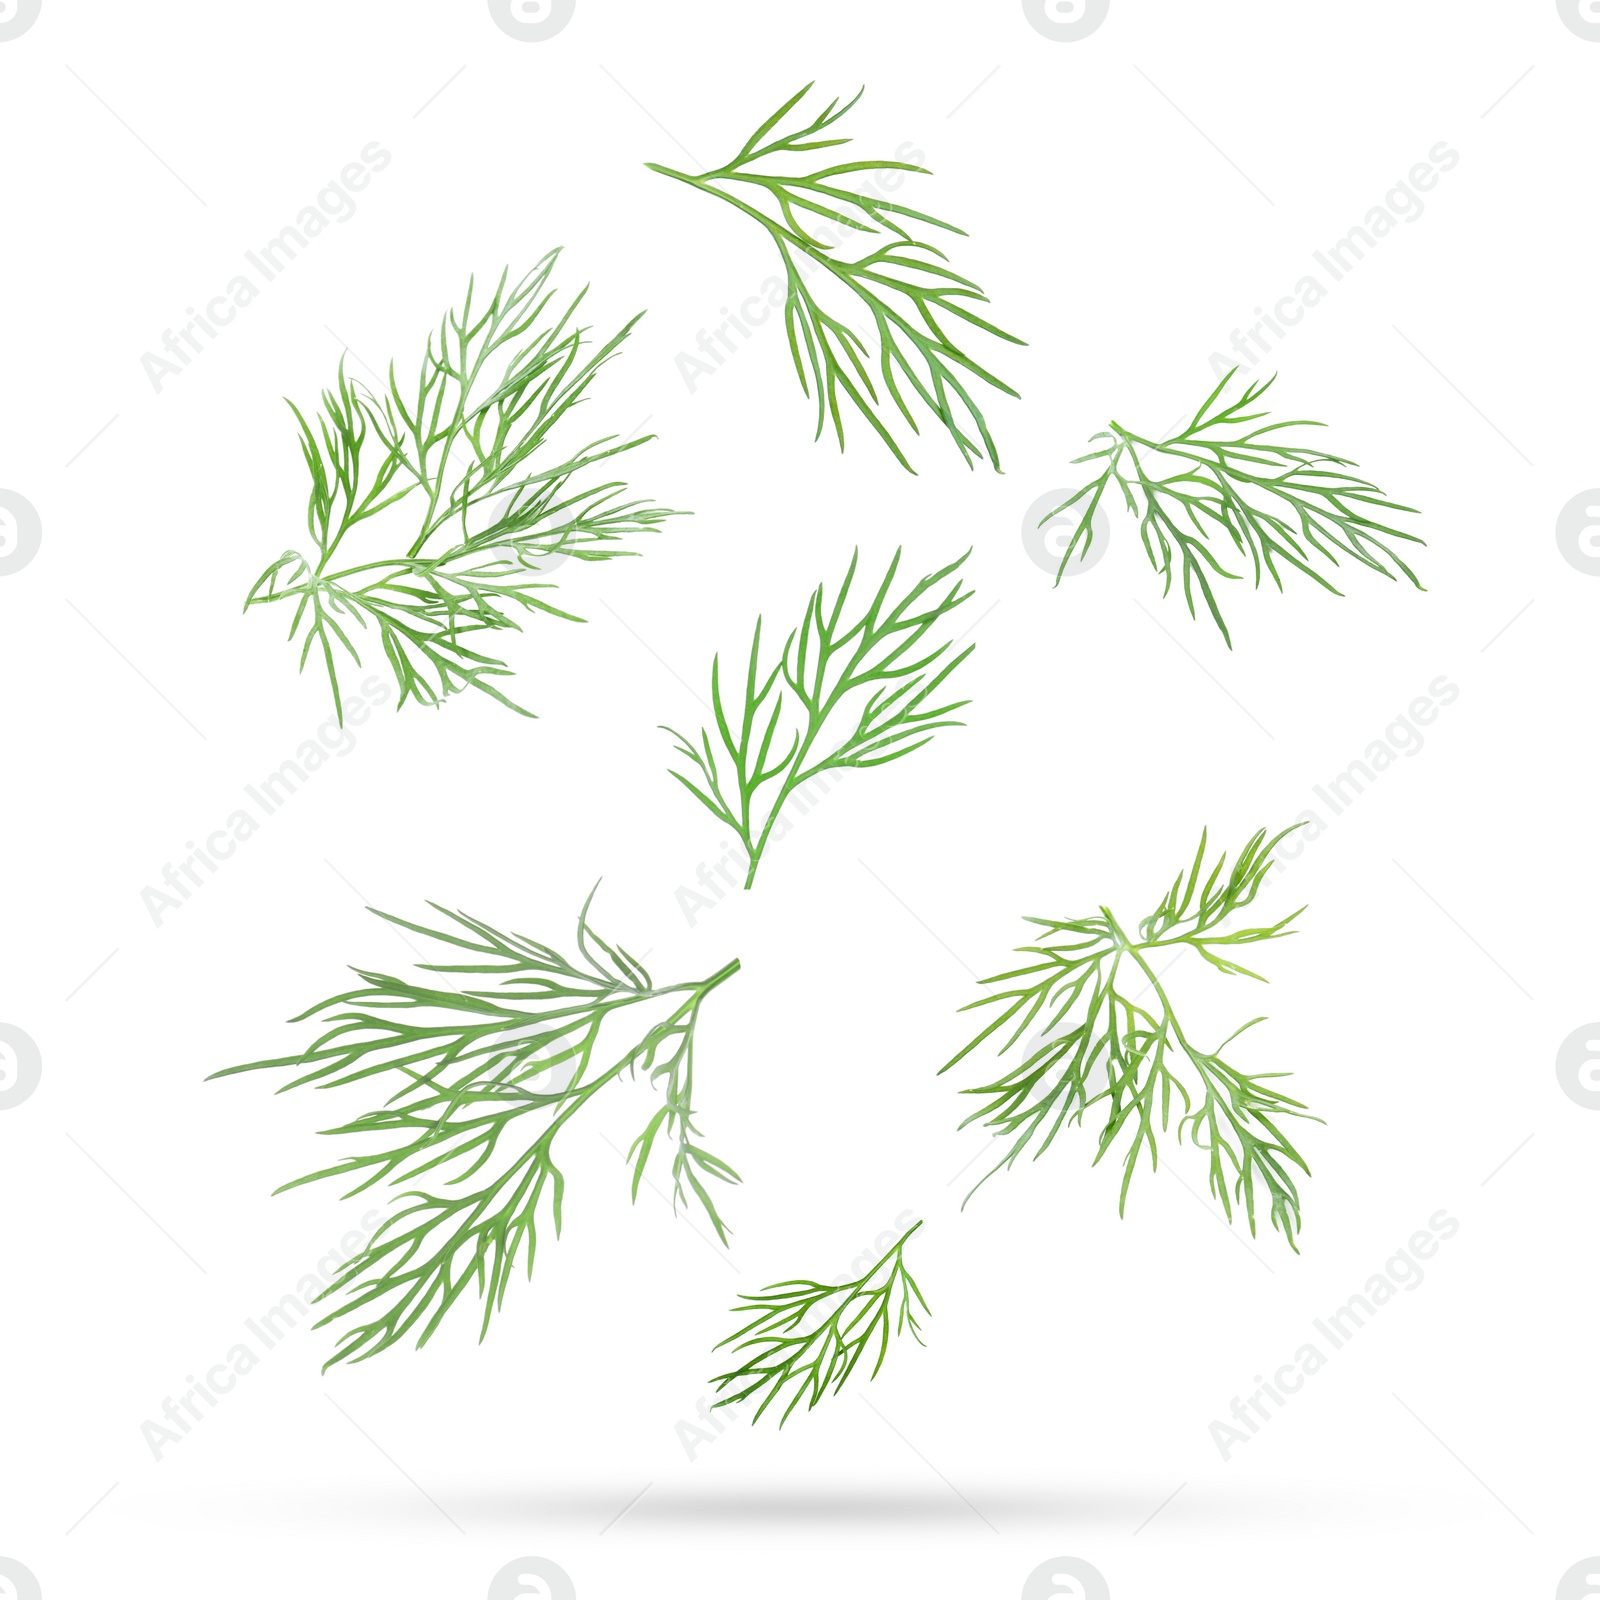 Image of Fresh green dill falling on white background